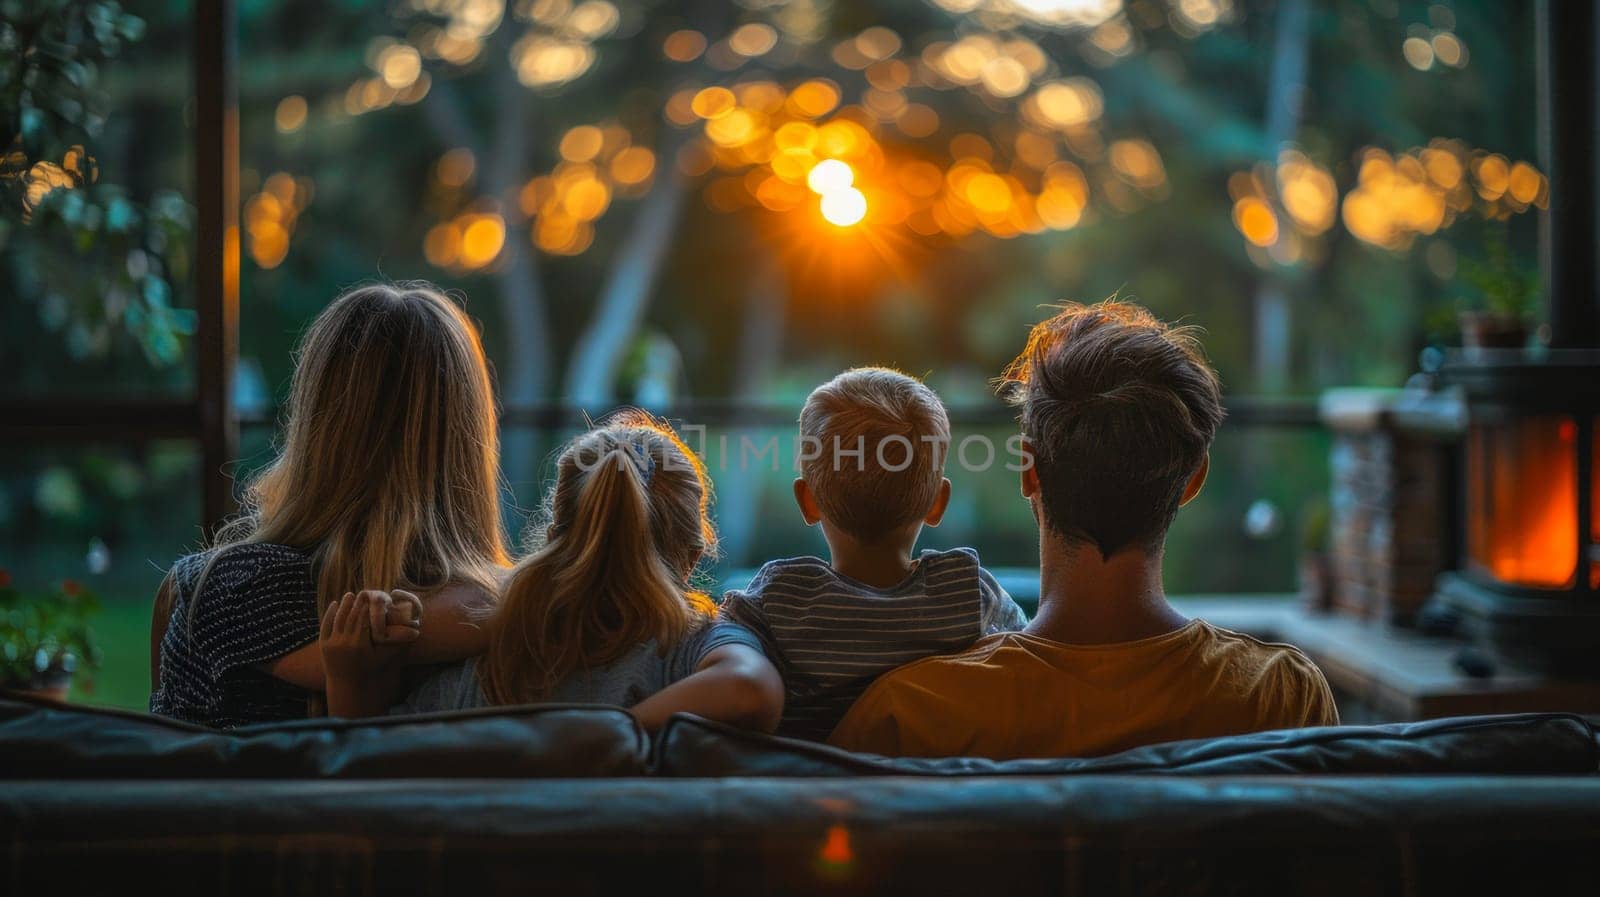 Rear view of a family of four sitting on a couch and watching the sun set in a sofa in their warm and cozy home.